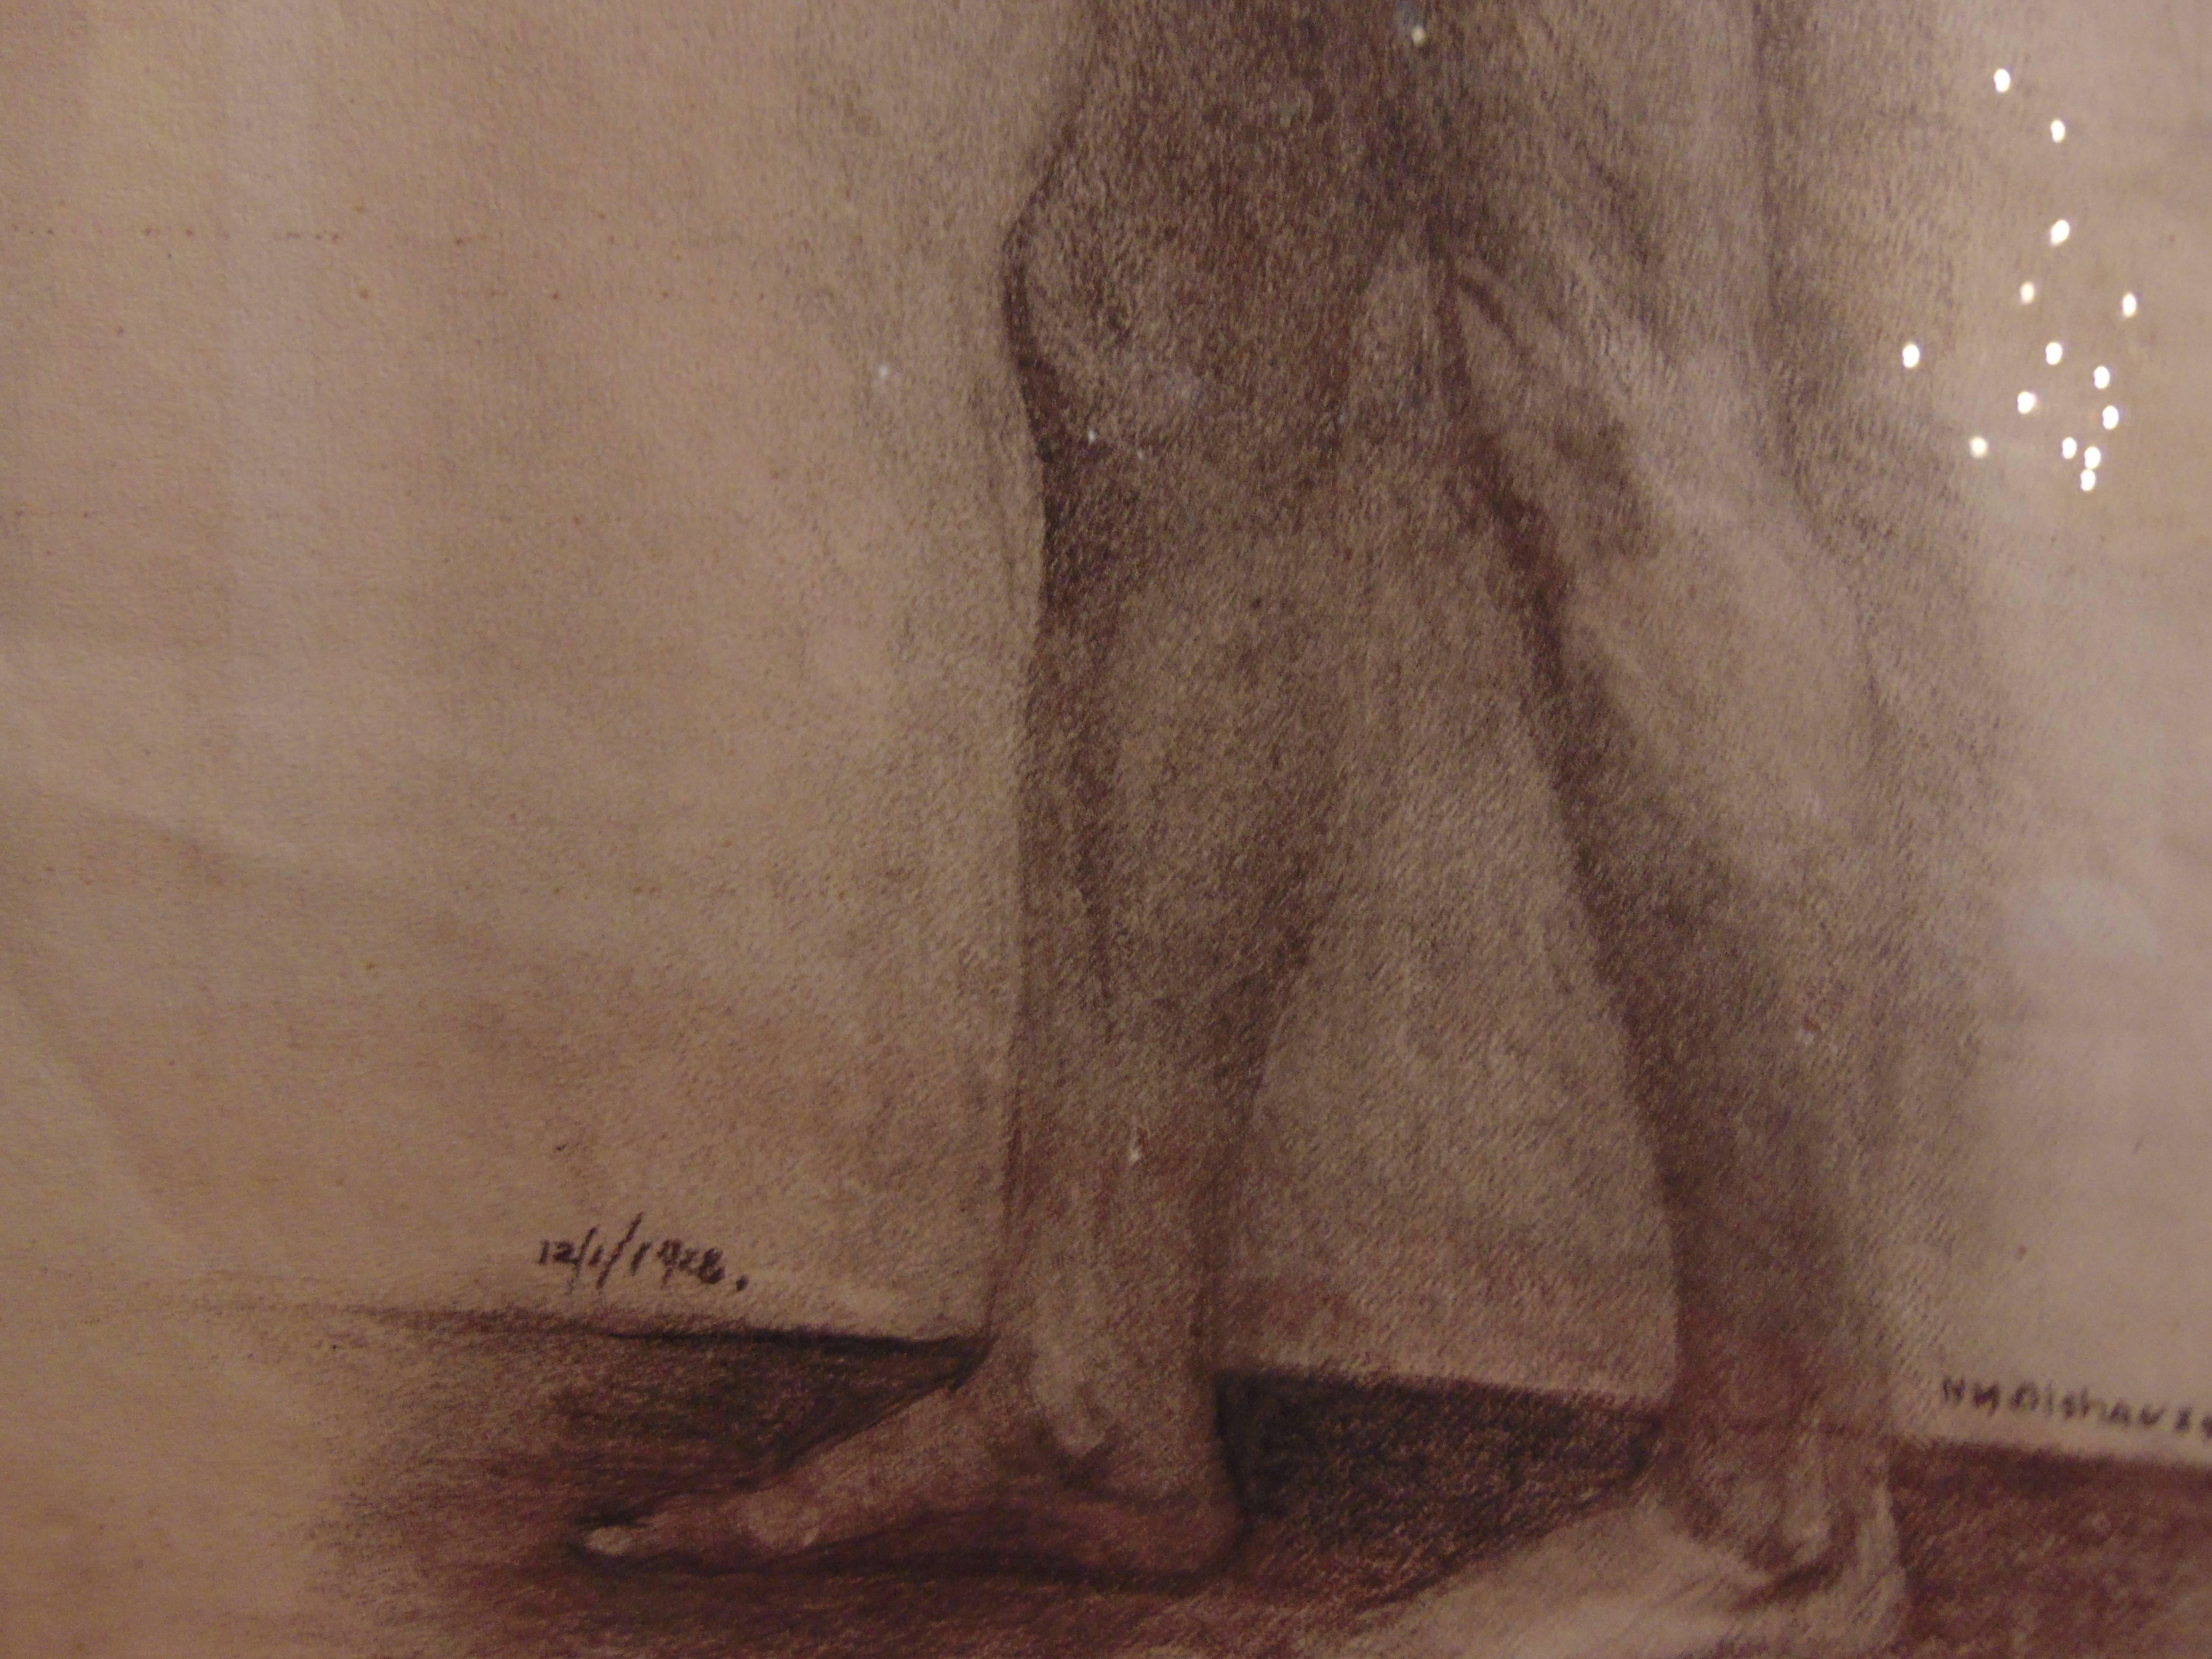 Modern Academic Male Nude Figure Drawing from 1929